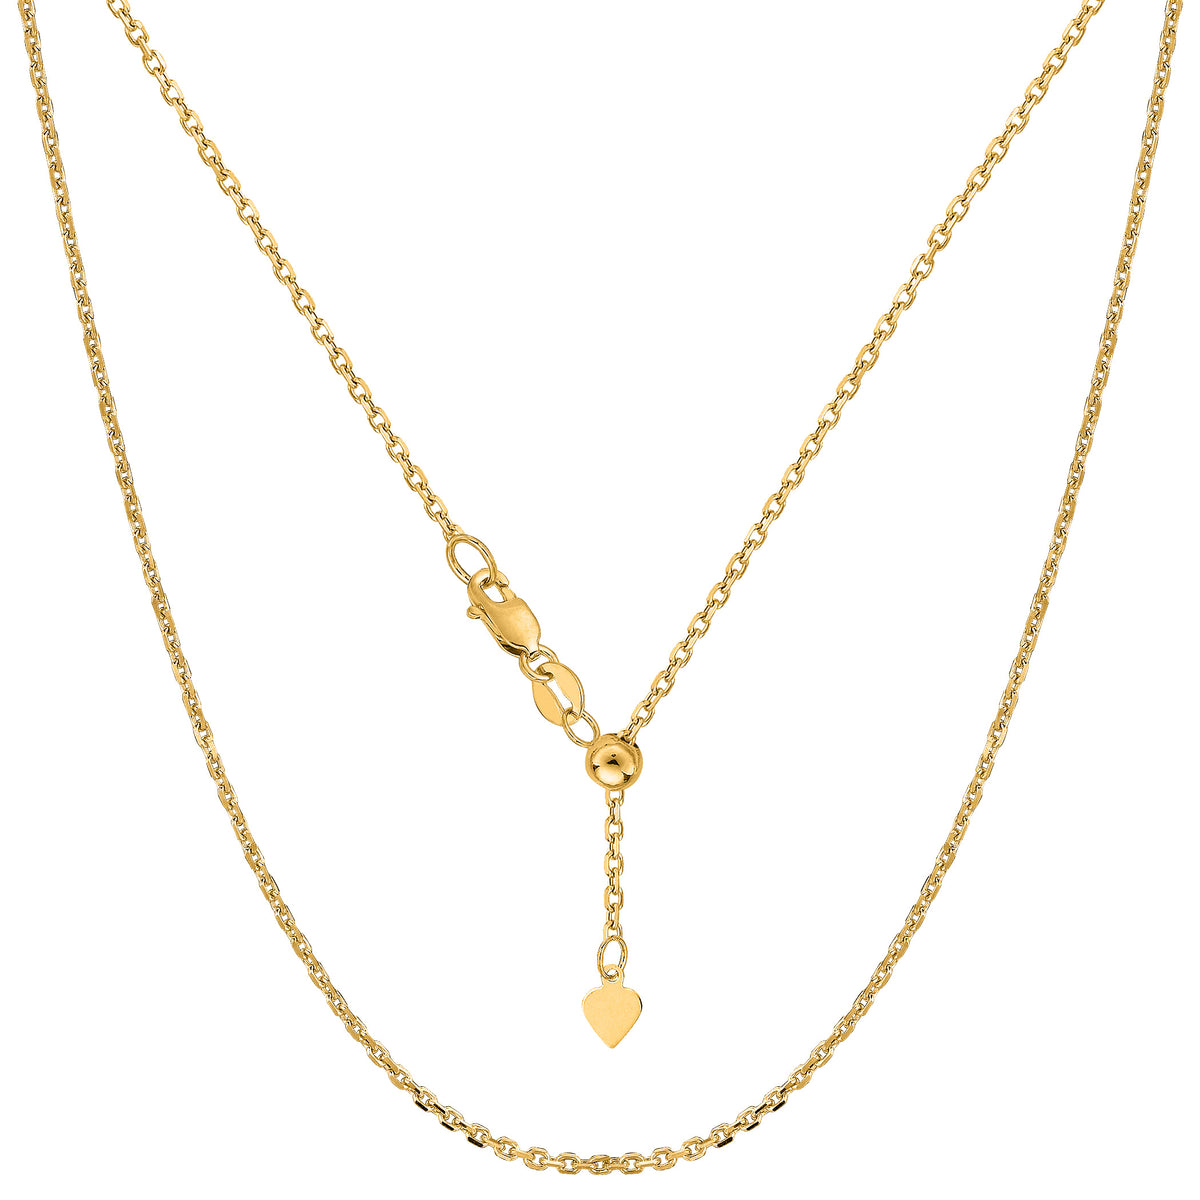 10k Yellow Gold Adjustable Cable Link Chain Necklace, 0.9mm, 22" fine designer jewelry for men and women